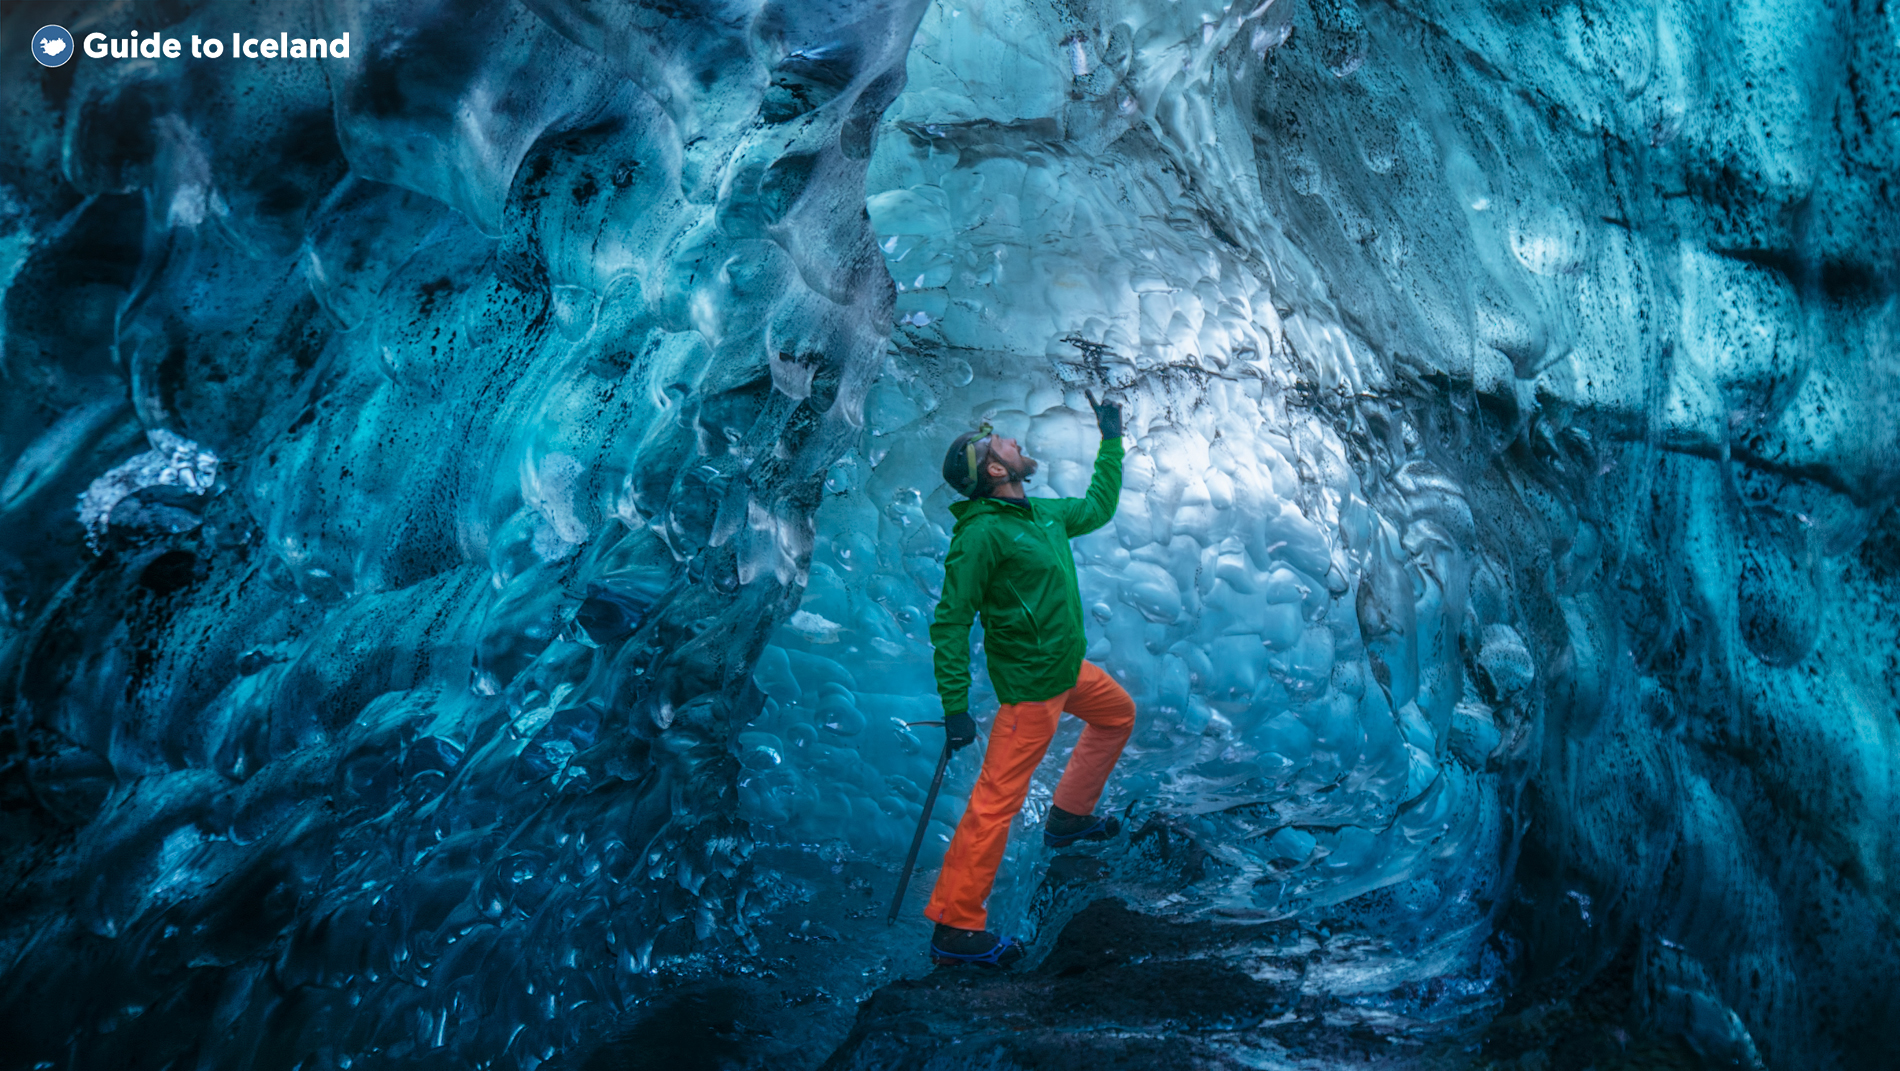 The ice caves at Vatnajokull National Park are stunning feats of nature